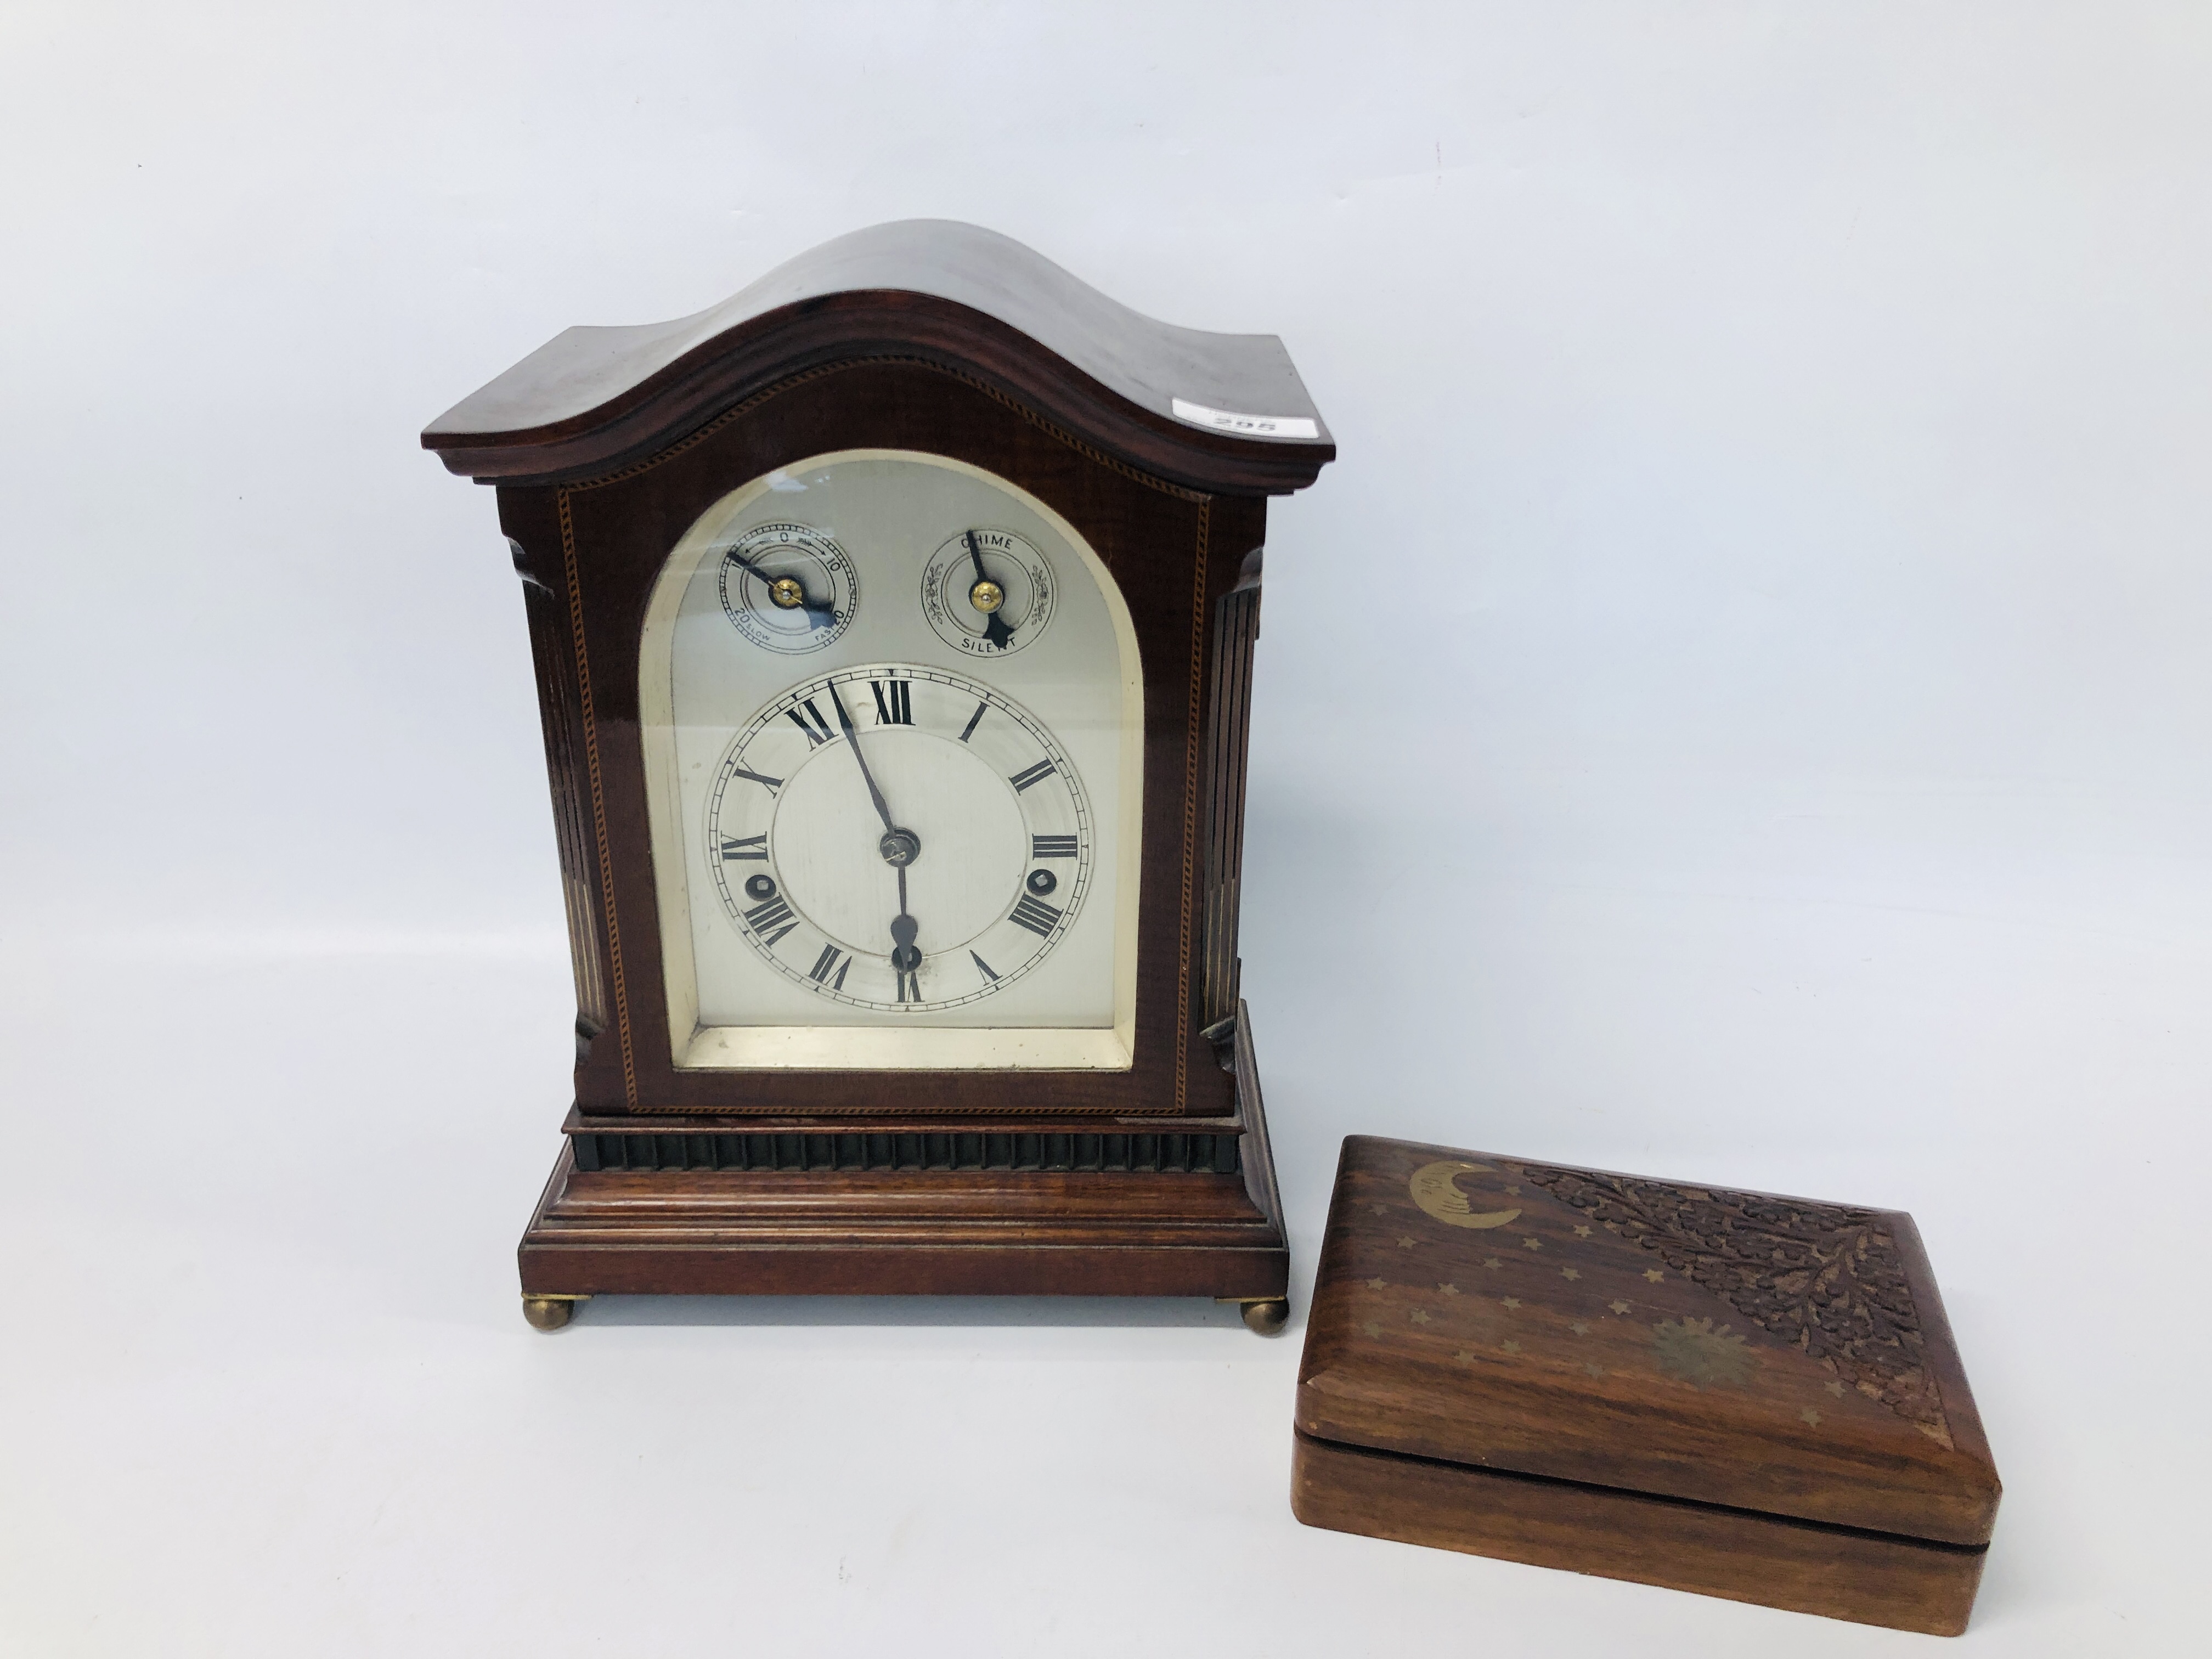 A GOOD QUALITY MAHOGANY CASED EDWARDIAN MANTEL CLOCK WITH INLAID DETAIL,